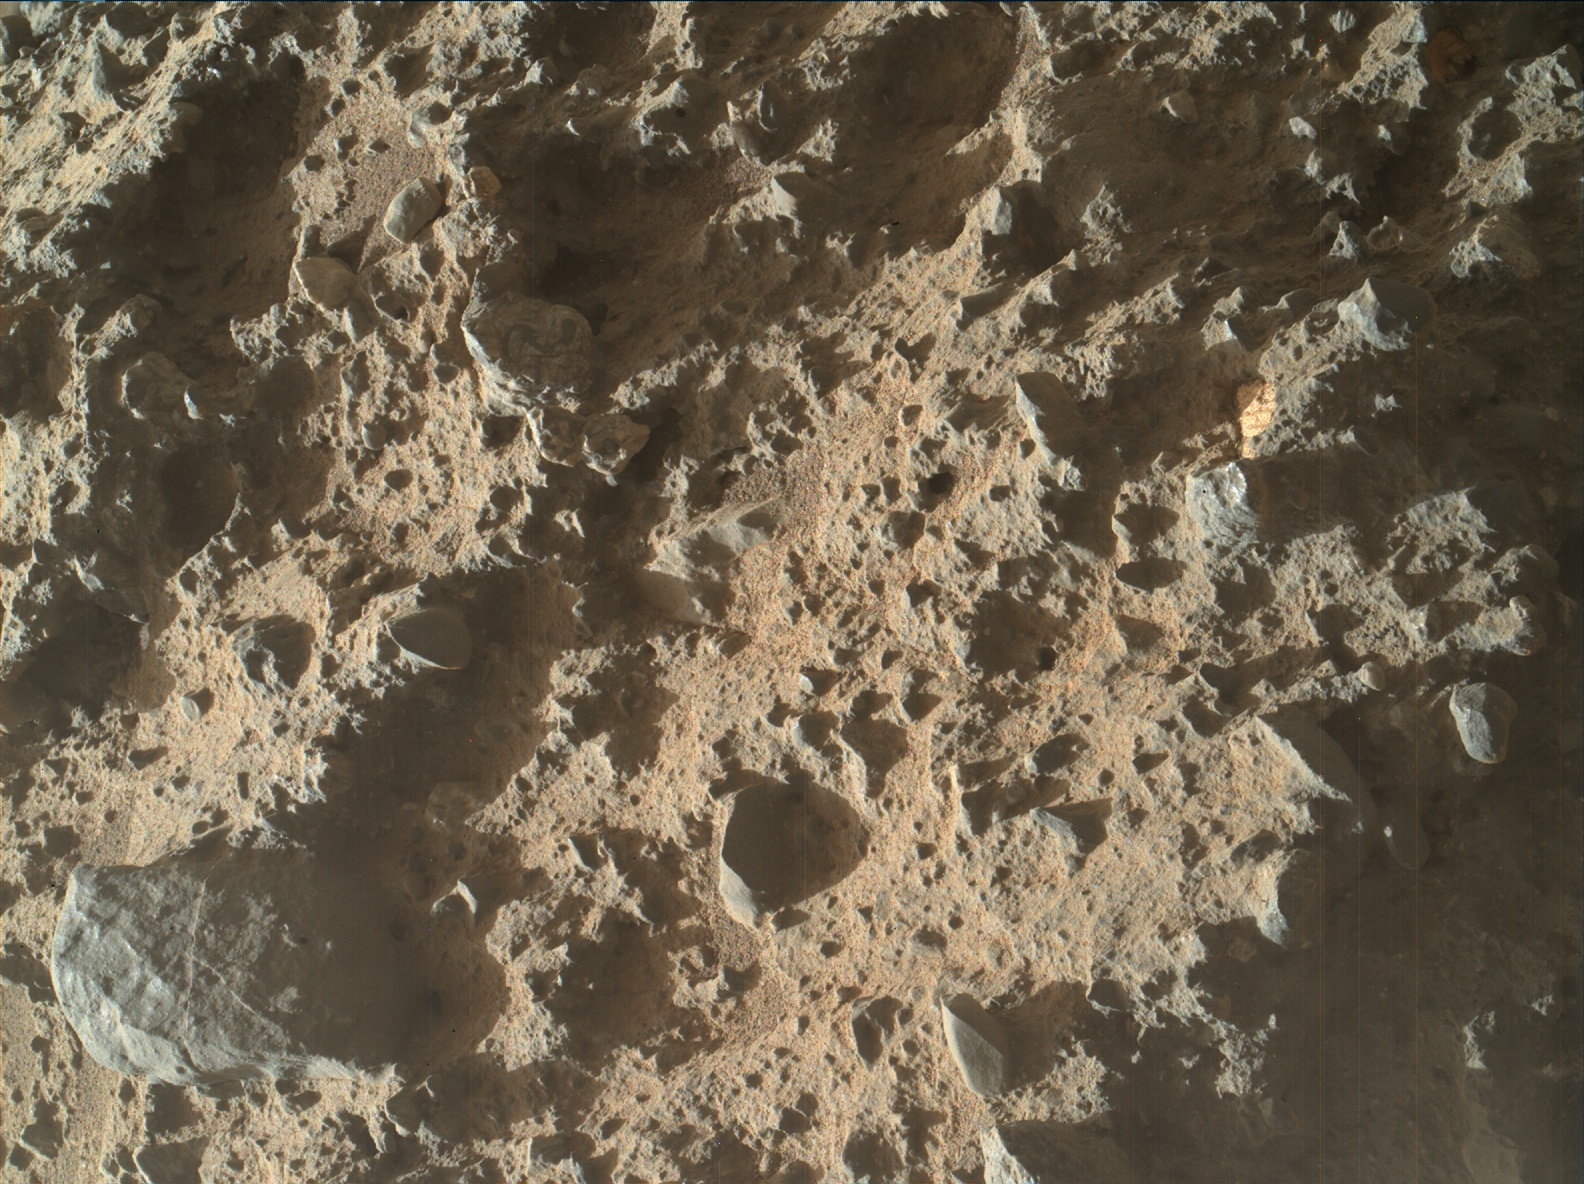 Nasa's Mars rover Curiosity acquired this image using its Mars Hand Lens Imager (MAHLI) on Sol 1408